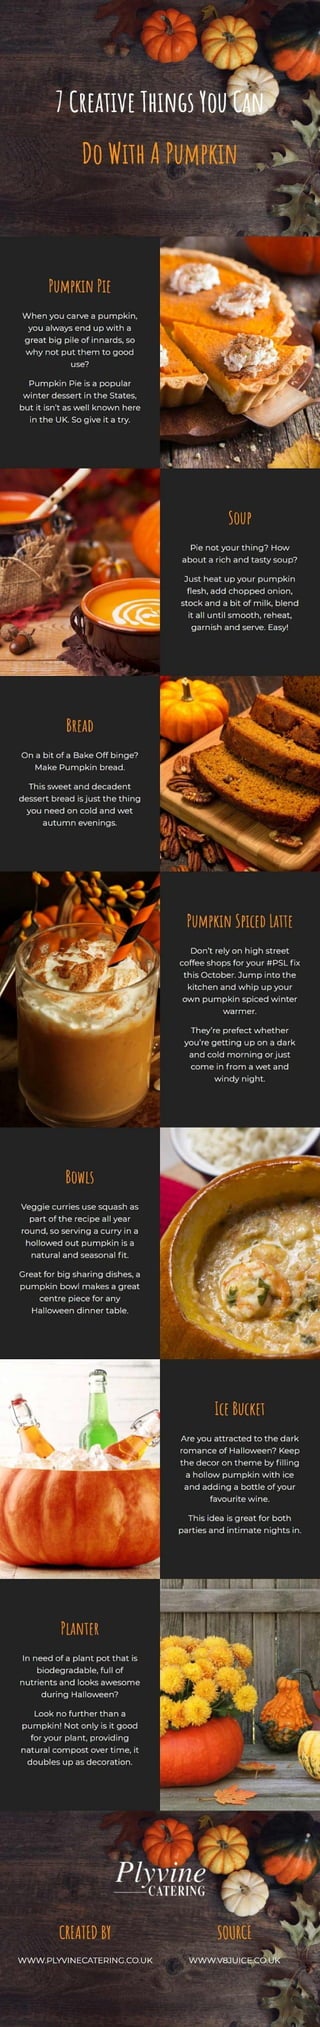 7 creative things you can do with a pumpkin